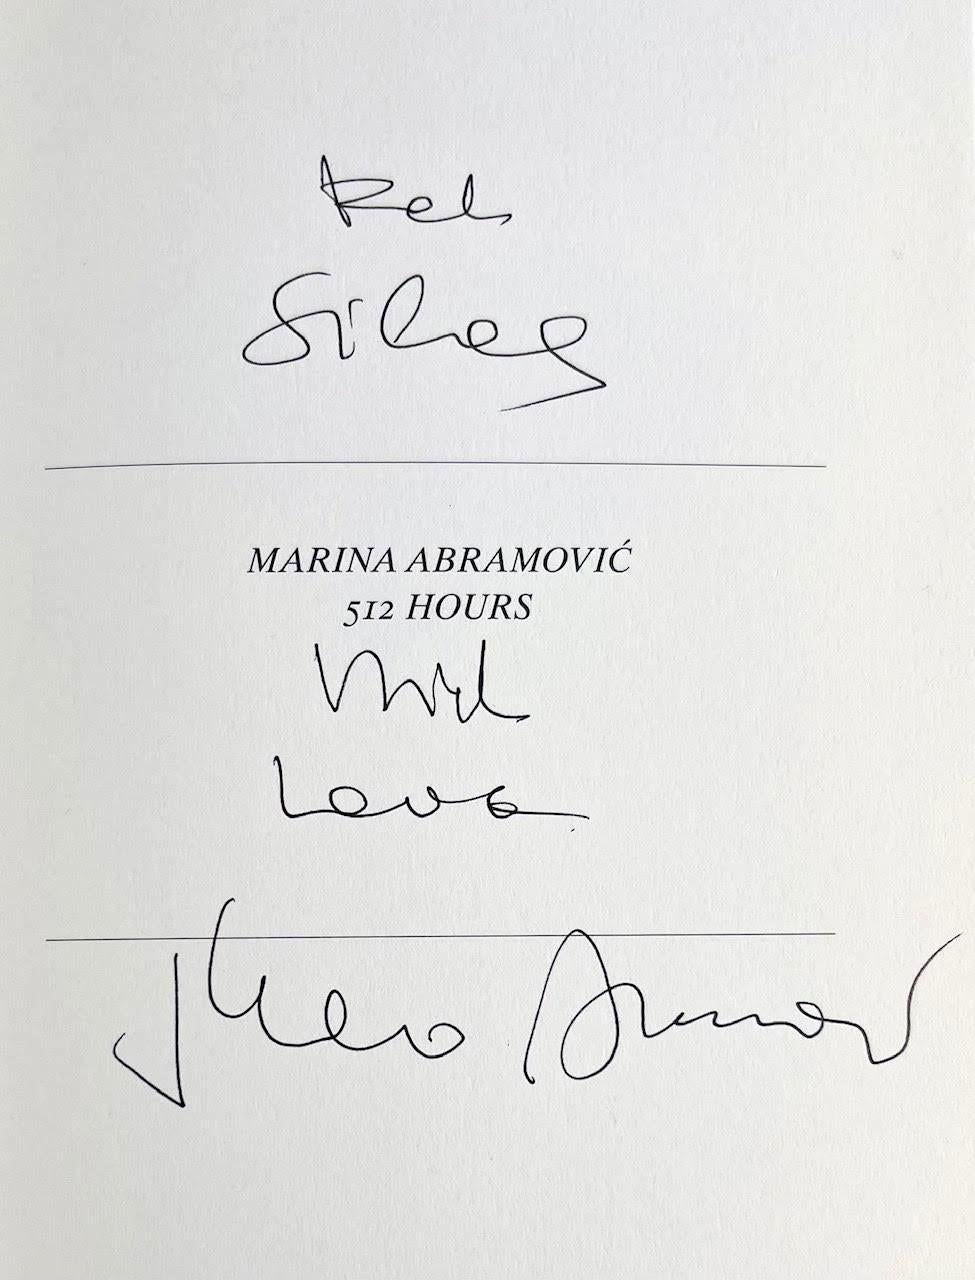 Marina Abramović
512 Hours (Monograph hand signed and inscribed by Marina Abramovic), 2014
Hardback monograph (hand signed and inscribed 'much love')
Warmly signed and inscribed by Marina Abramovic on the title page
8 1/2 × 6 × 3/4 inches
Gorgeous